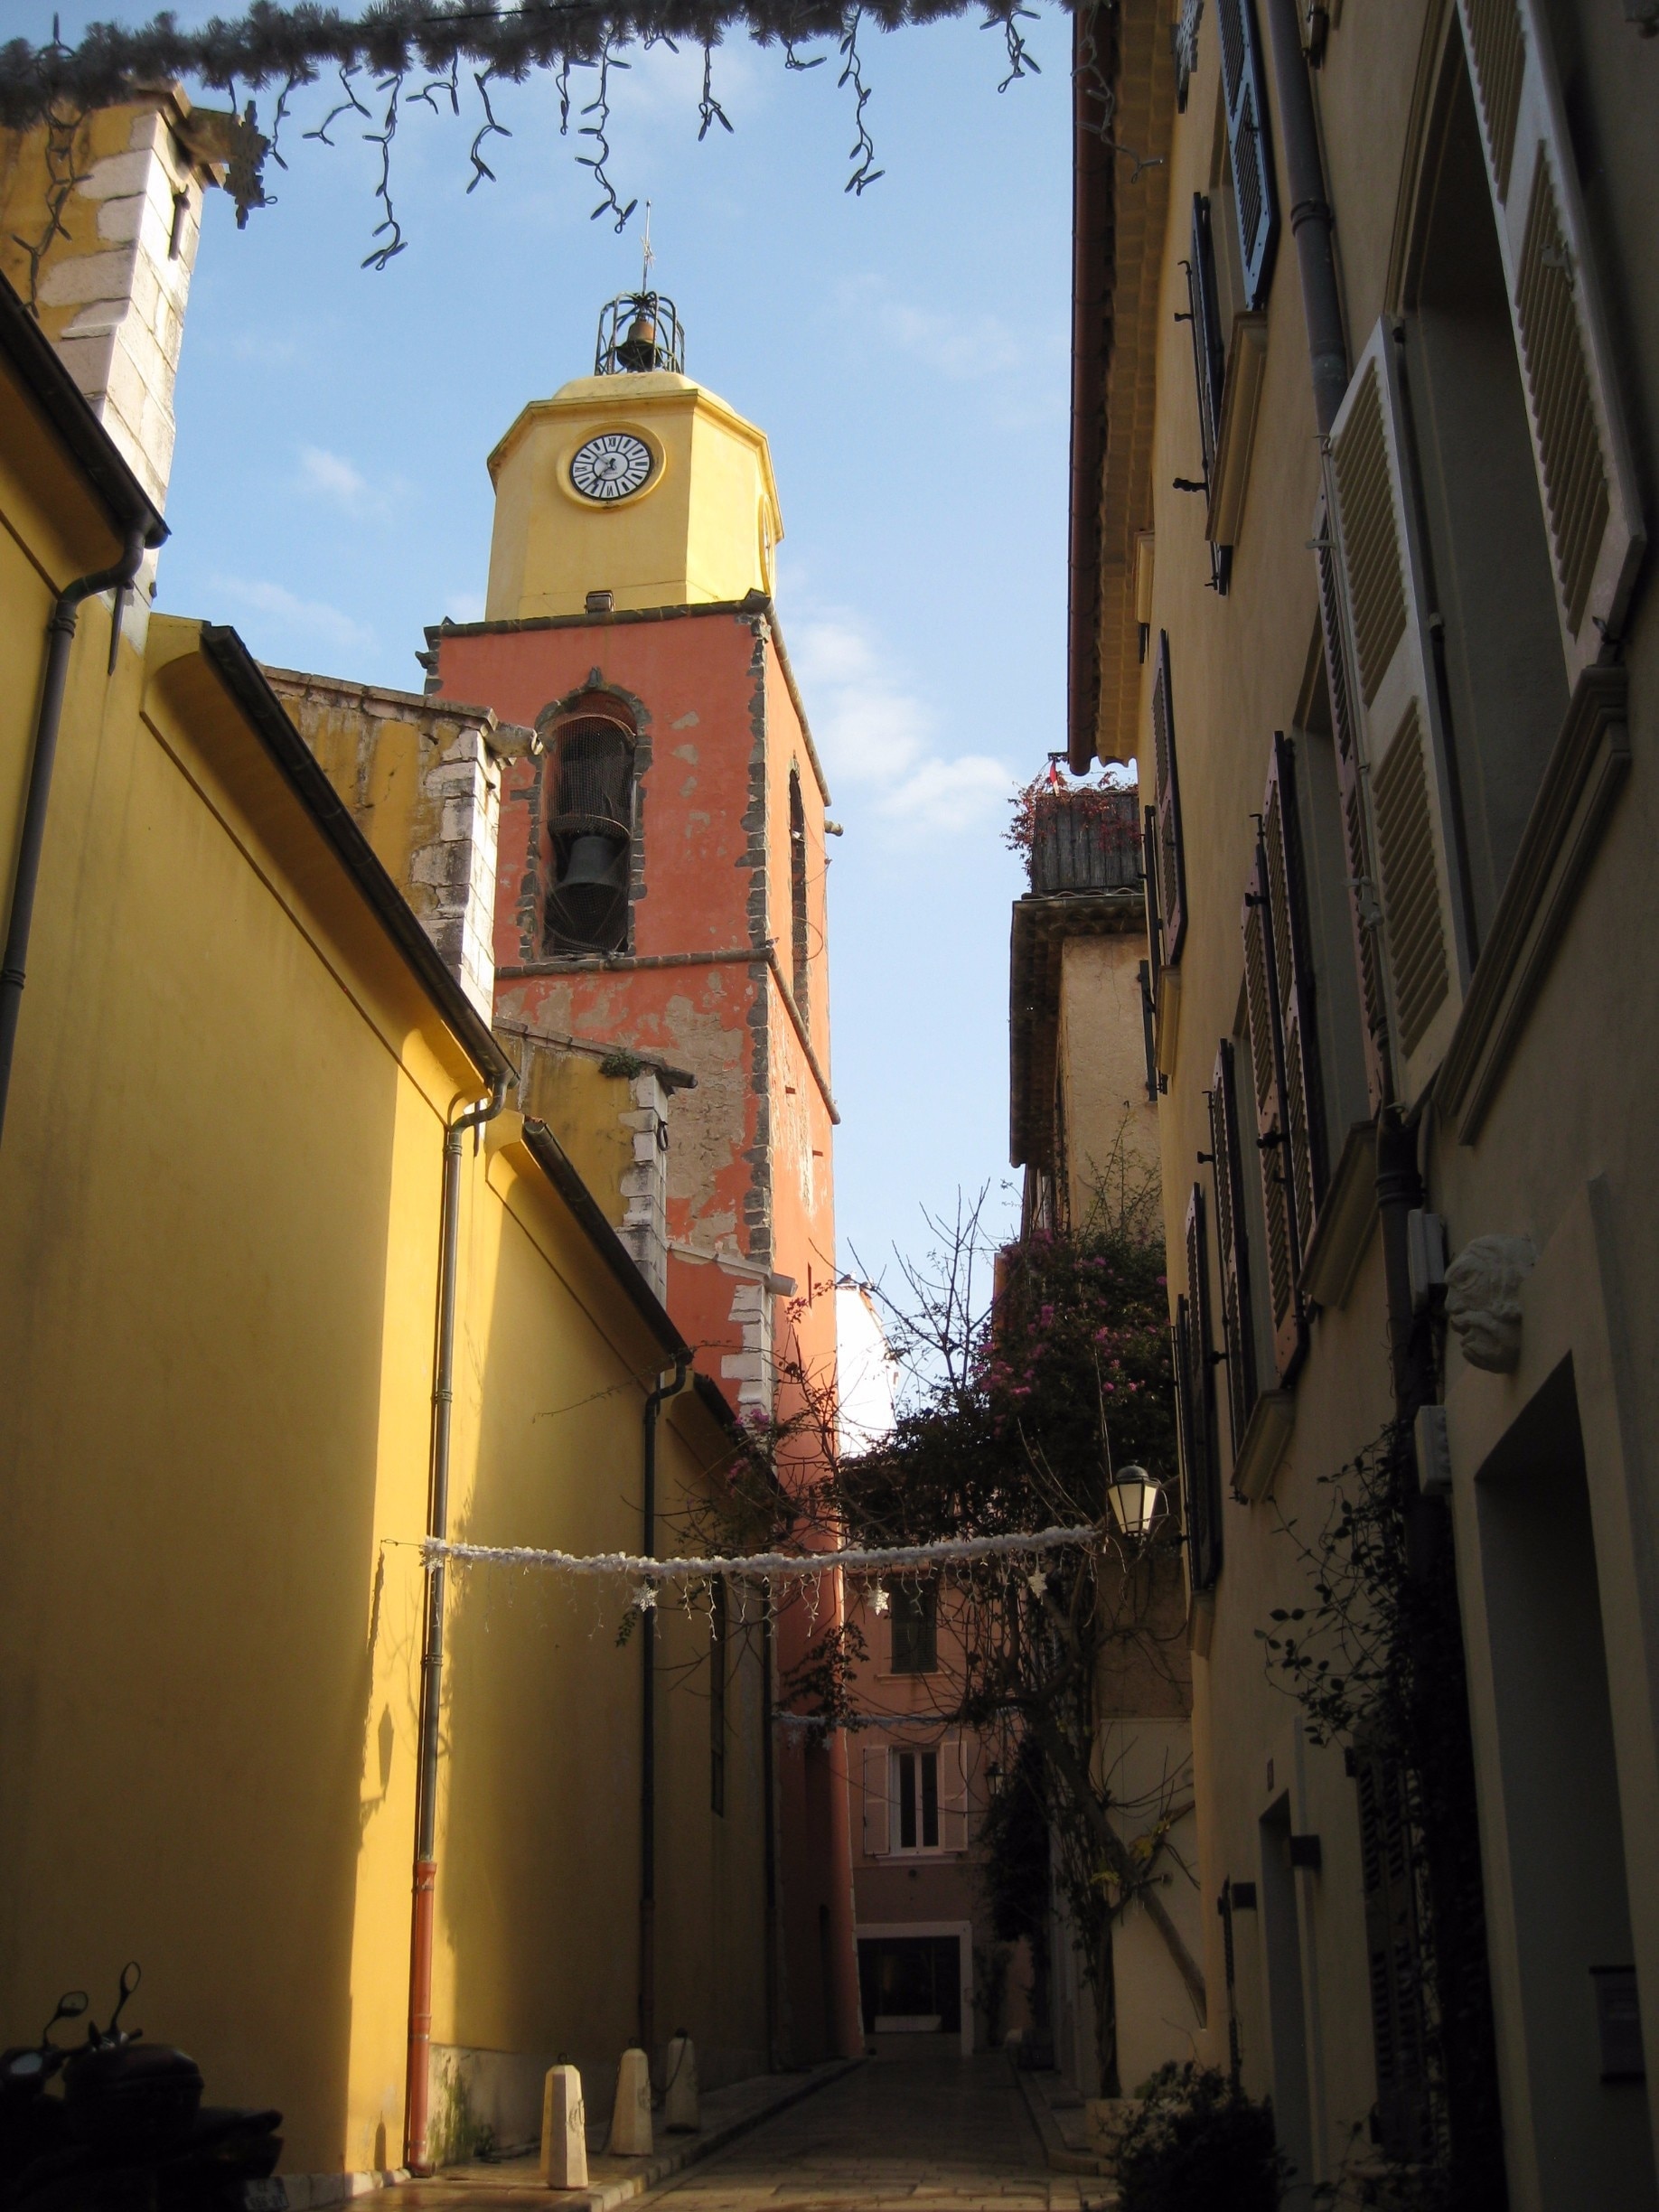 Walking the streets to the church topped with a bell tower which can be seen from the port.
-2015